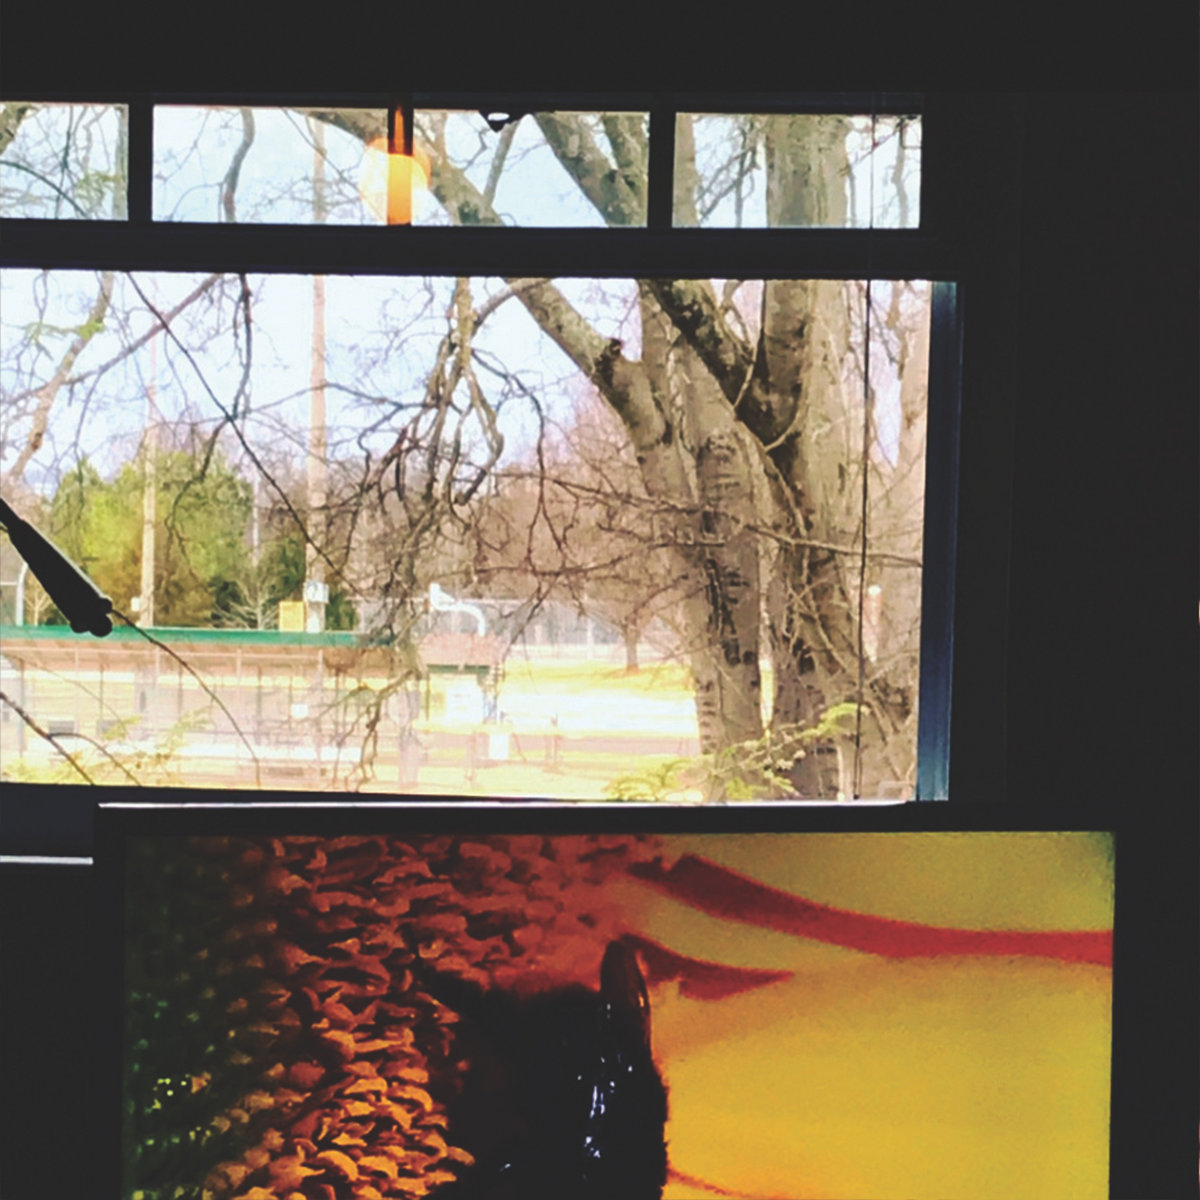 Cover art for Roach Friends by Melaina Kol. Two photos collaged together, one of a view outside of a window and one of a sunflower up-close.